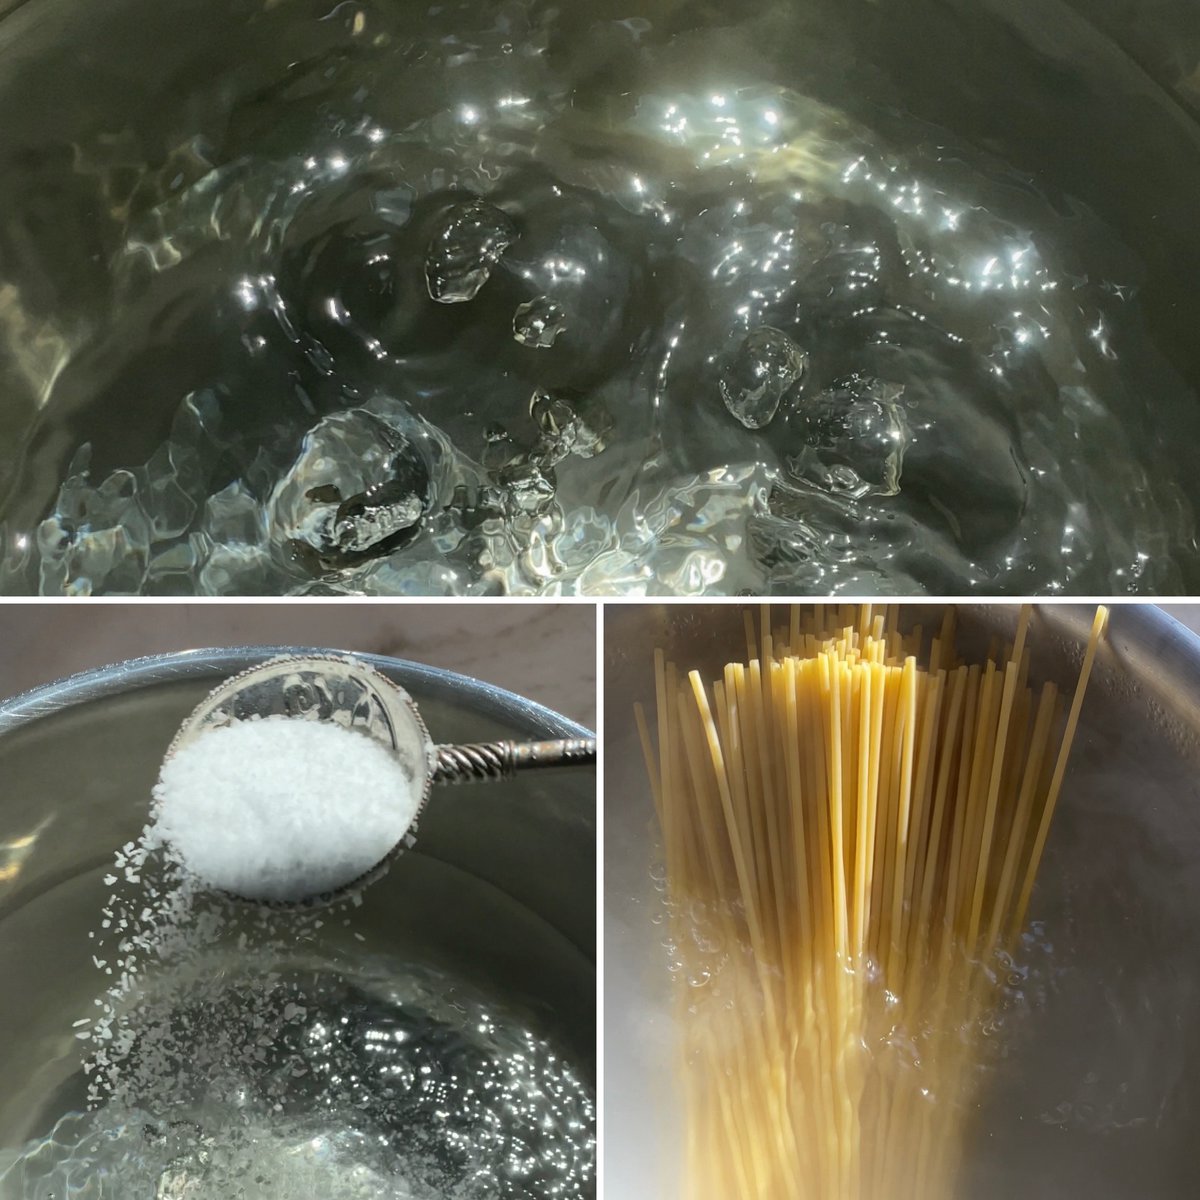 How to boil spaghetti perfectly every time- boiling water, adding salt, and adding long spaghetti.